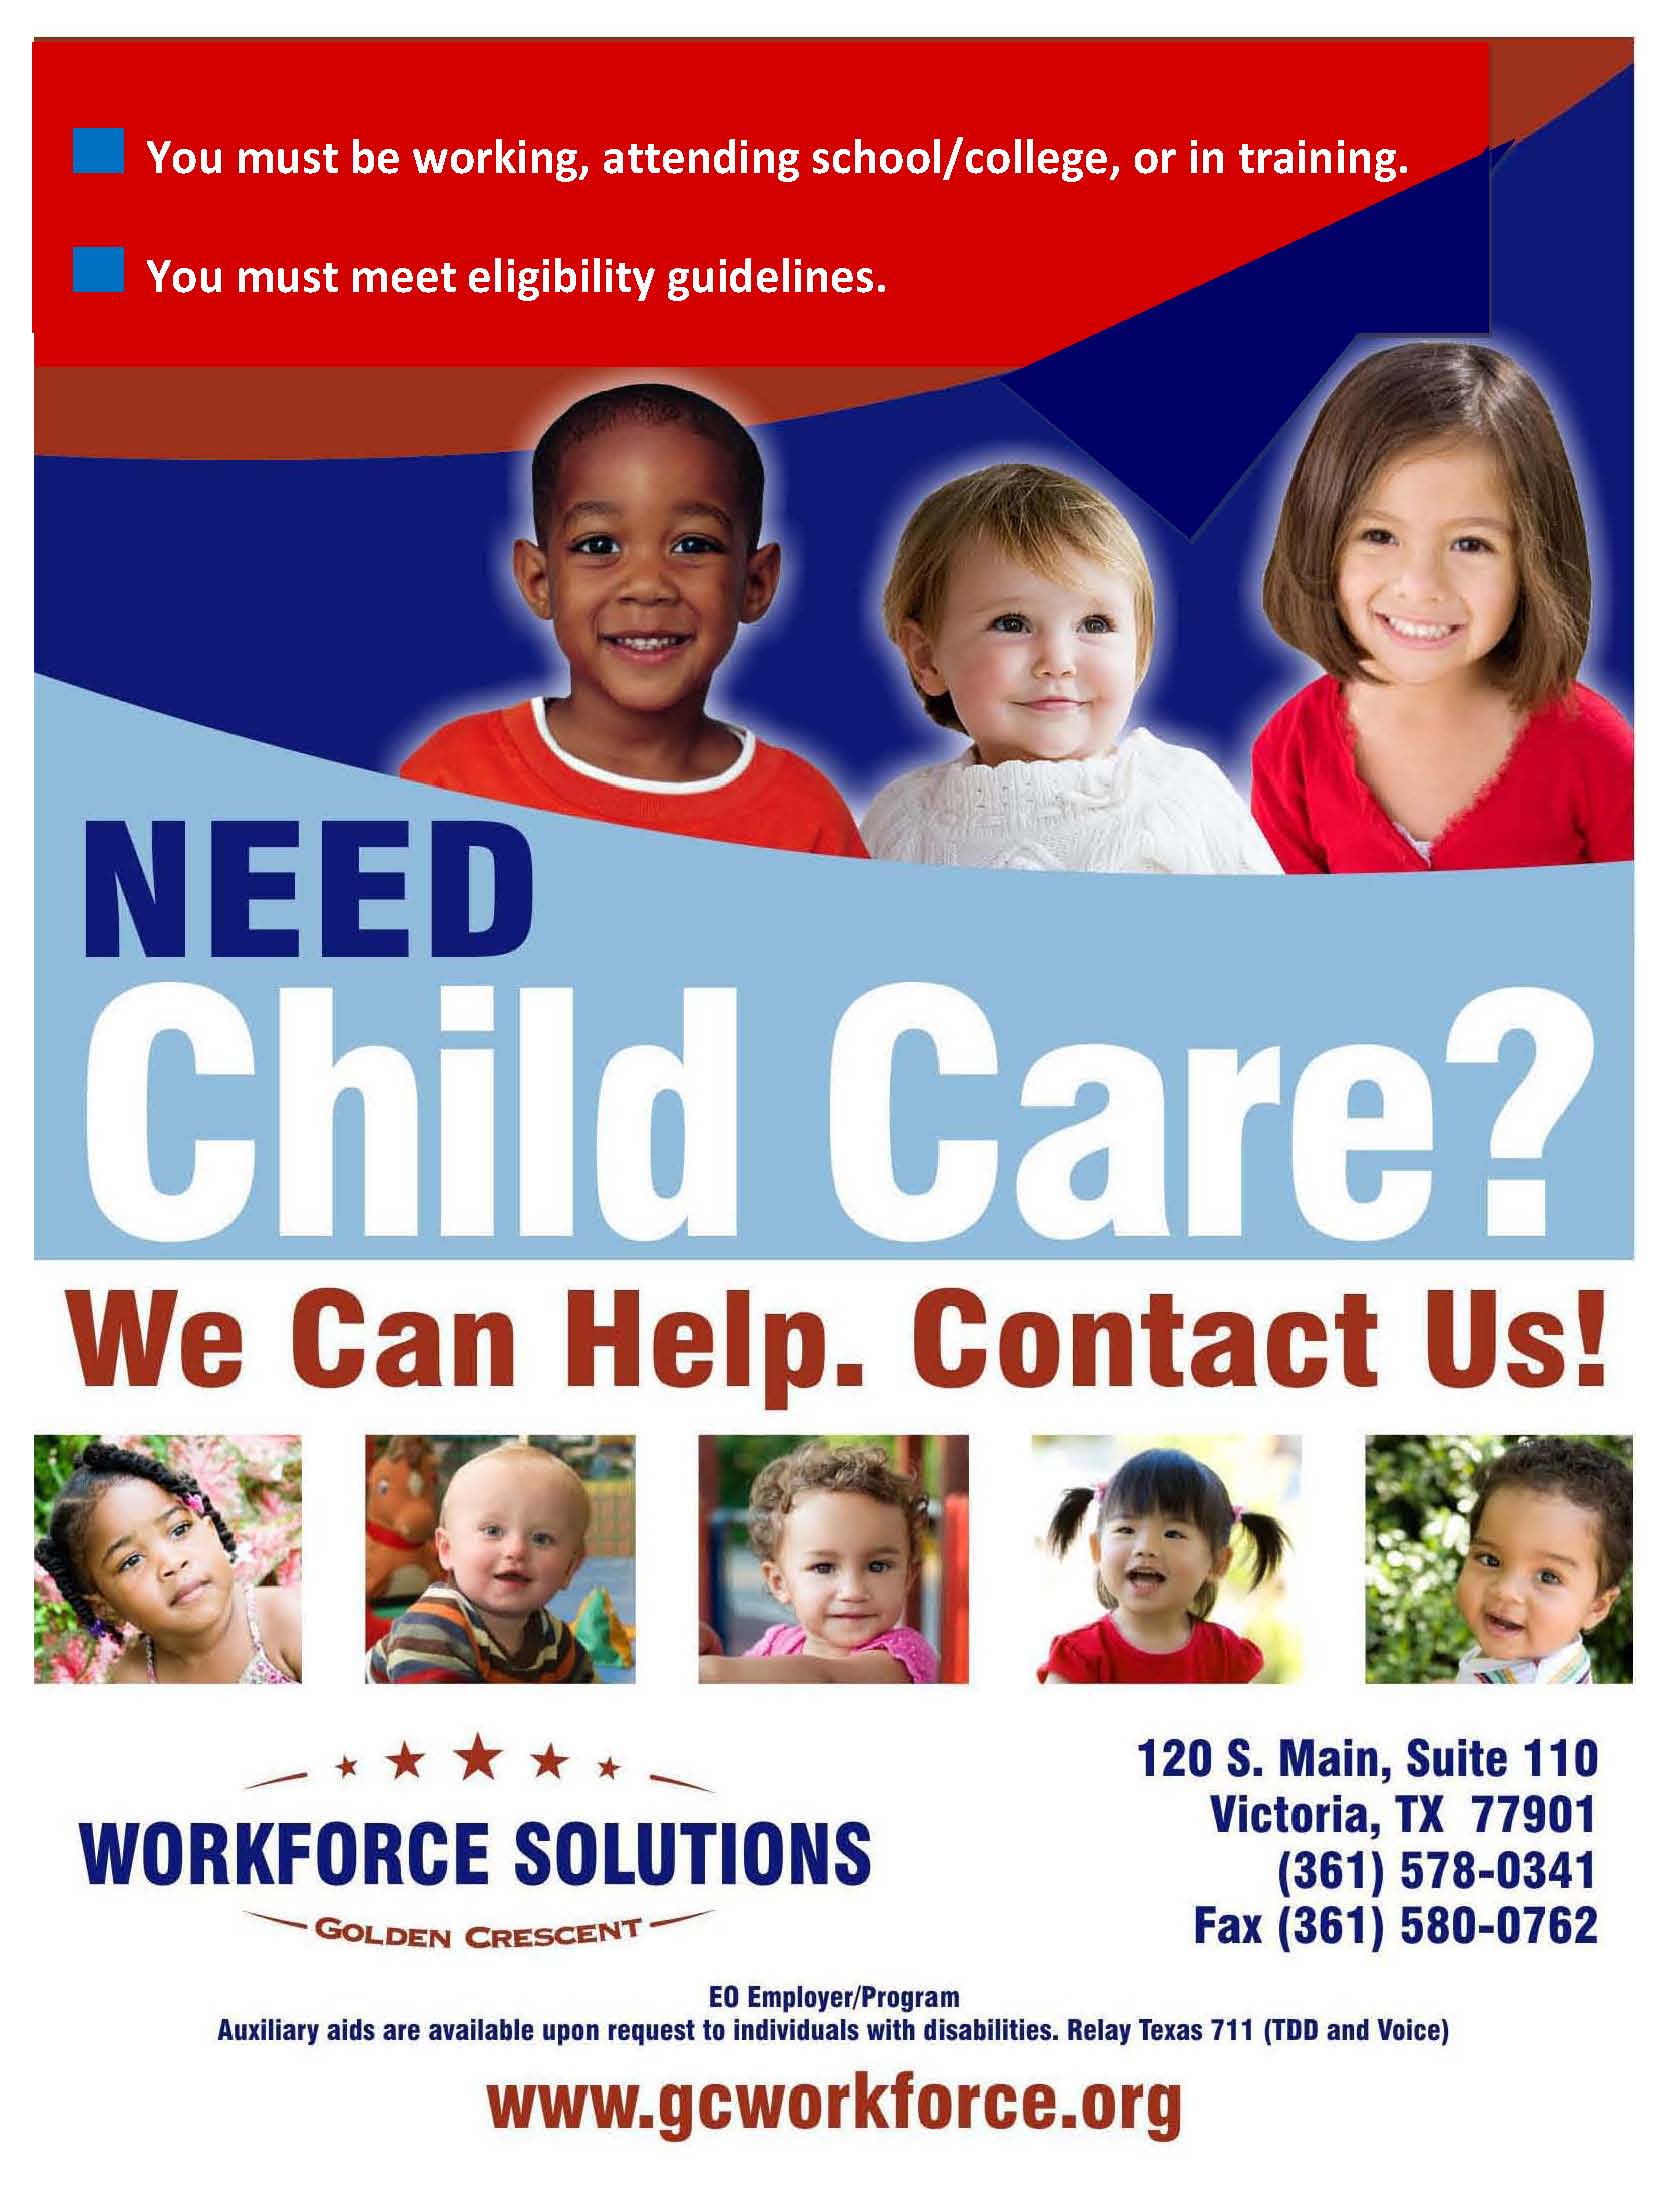 How do you contact Workforce Solutions in Texas?